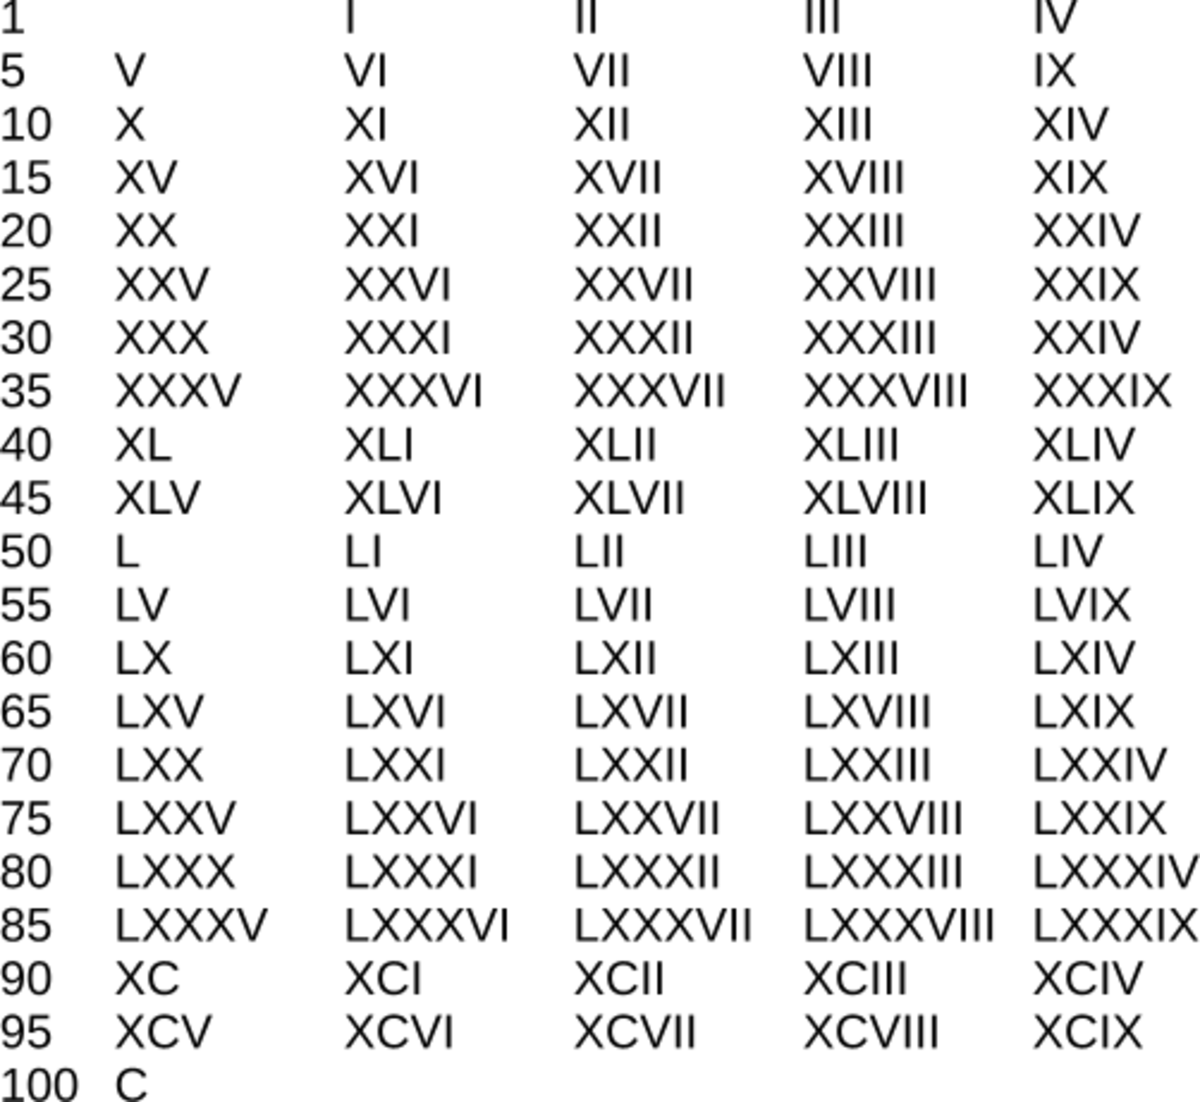 Roman Numeration System and Common Numerals